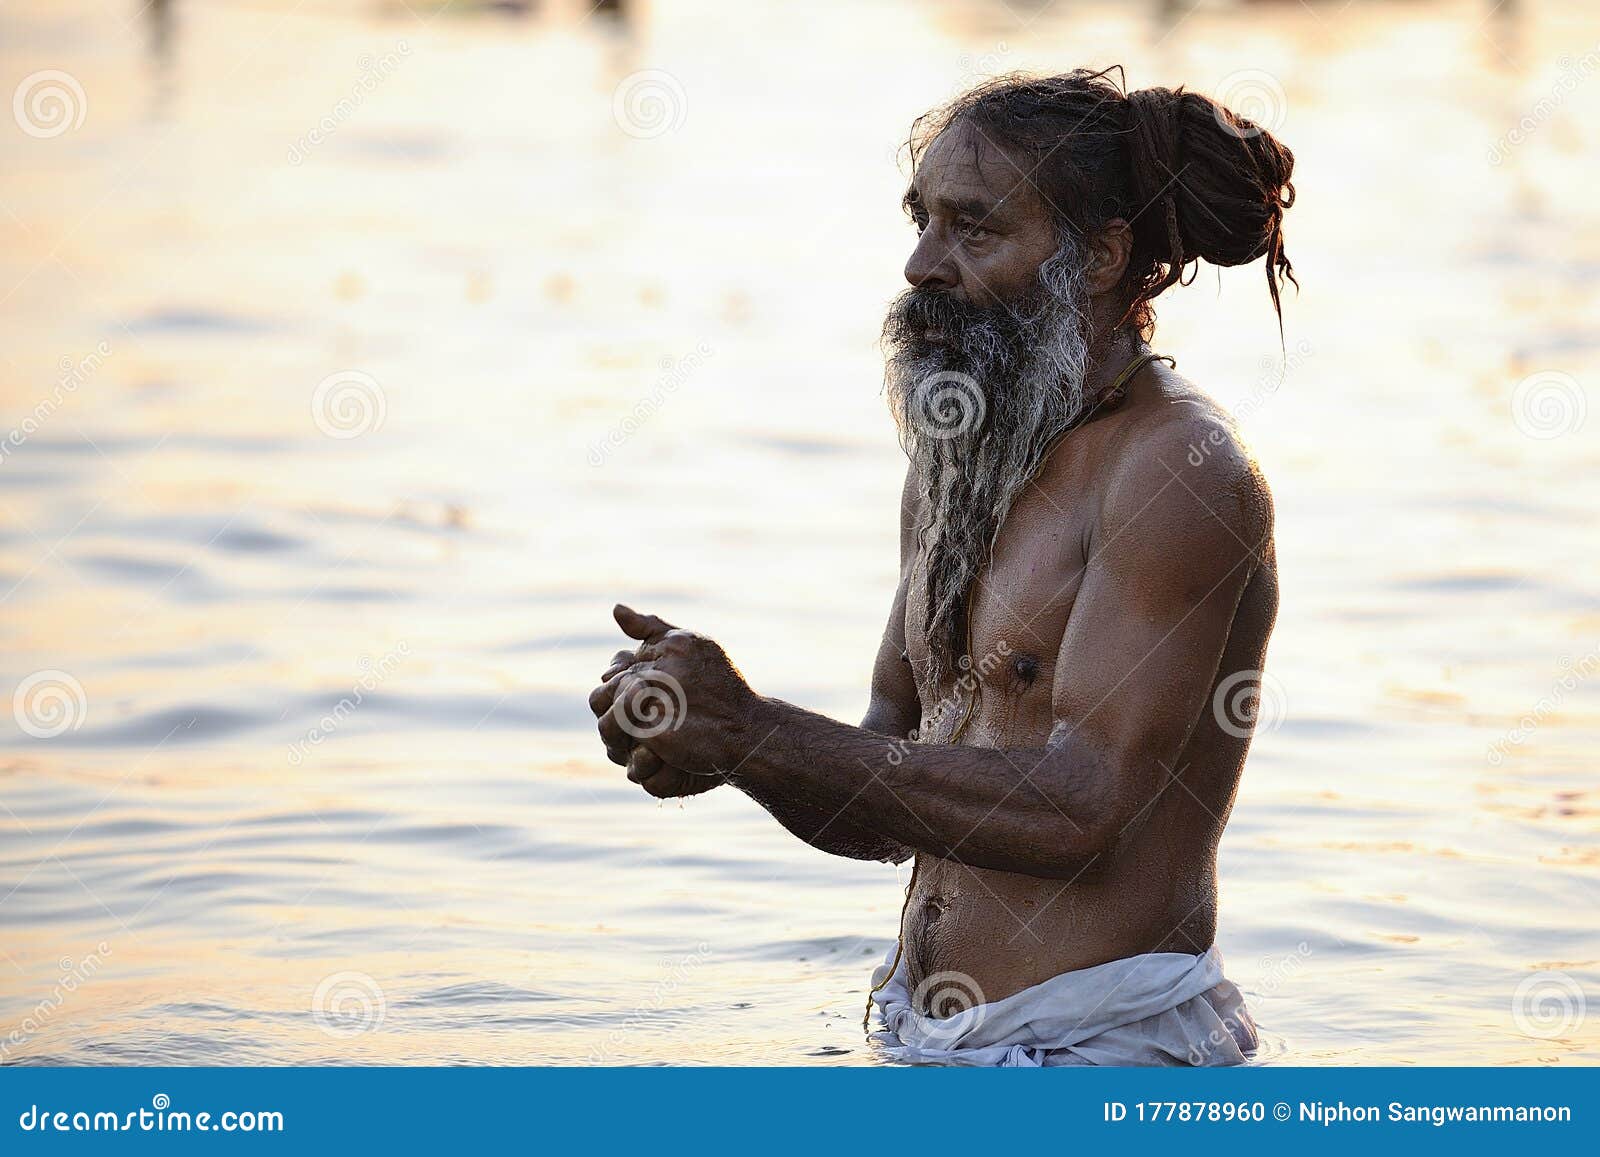 Indian Man With A Mustache Without A Shirt On The Ganga River For